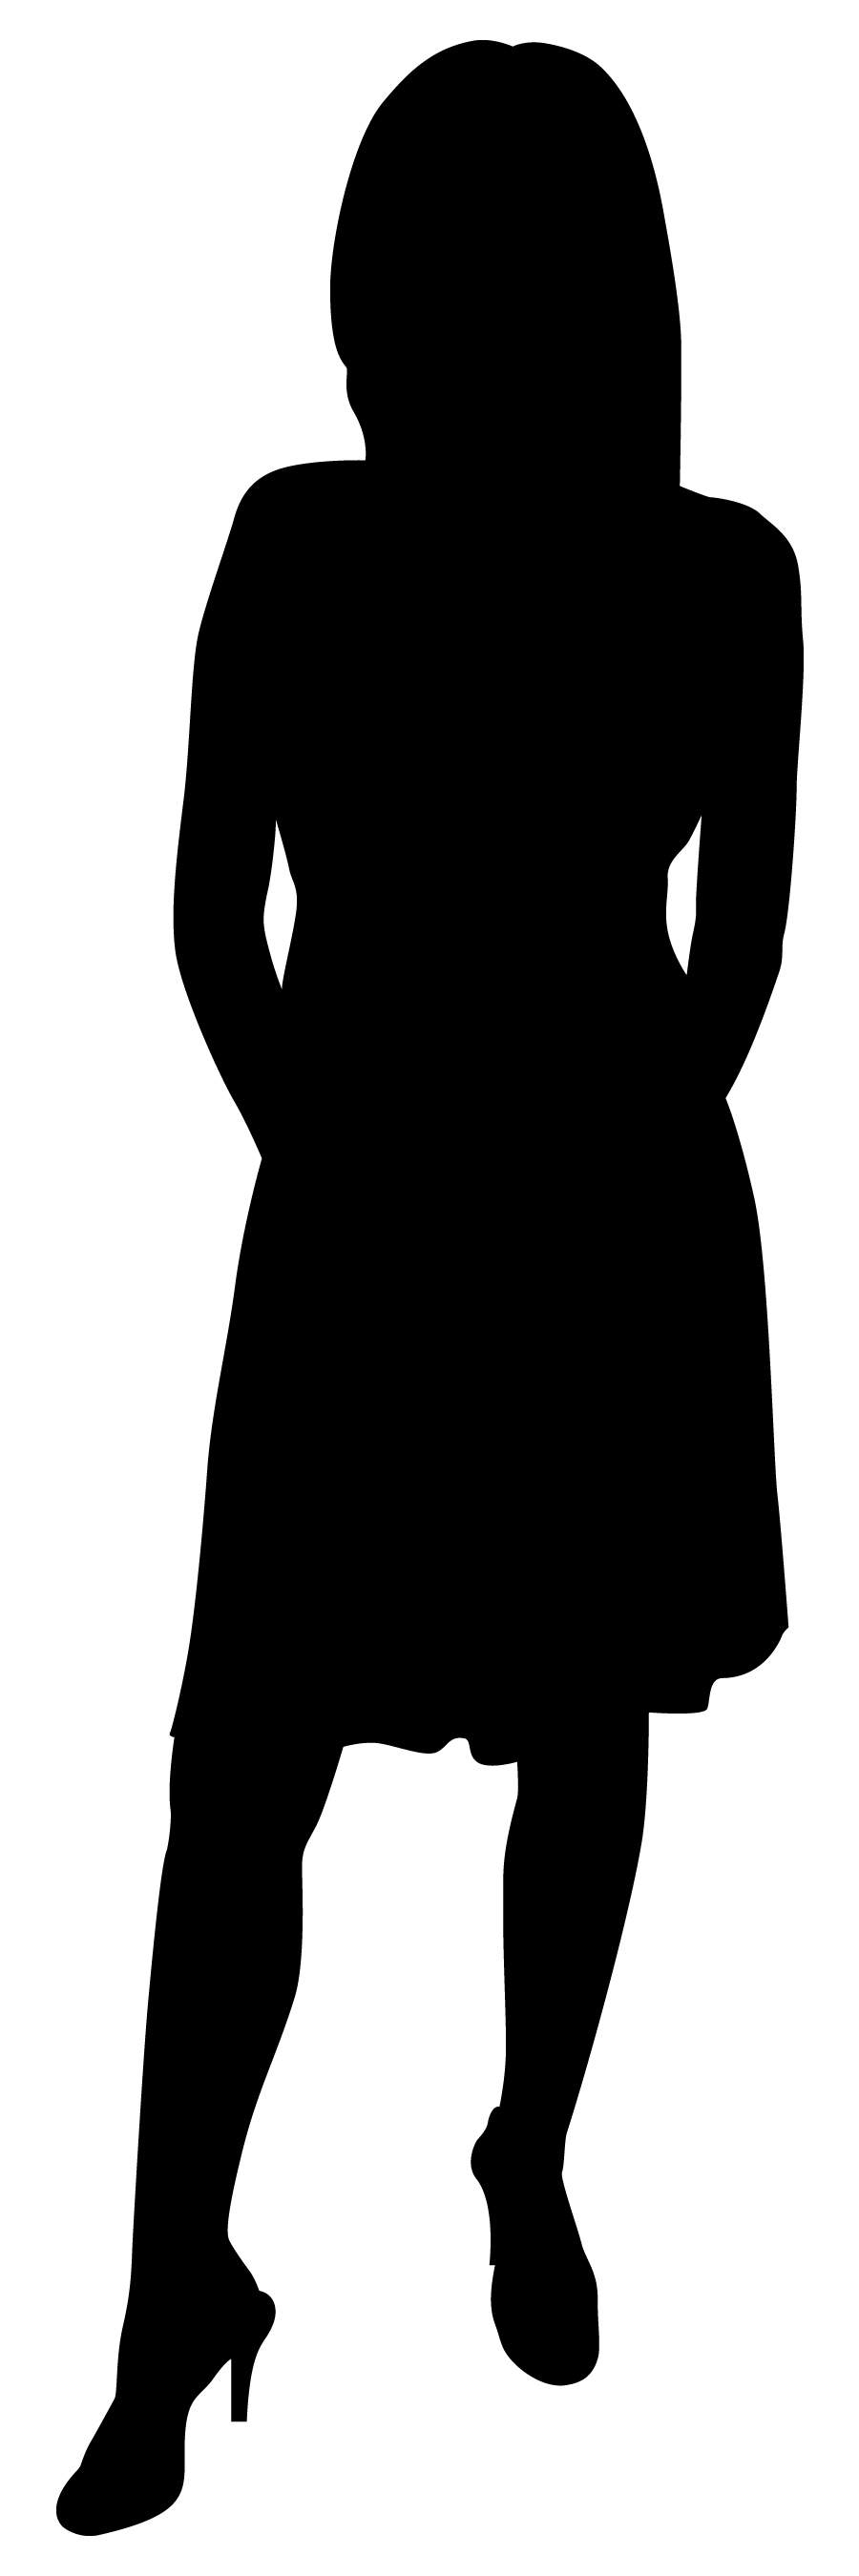 Images For > Man Woman Silhouette Business